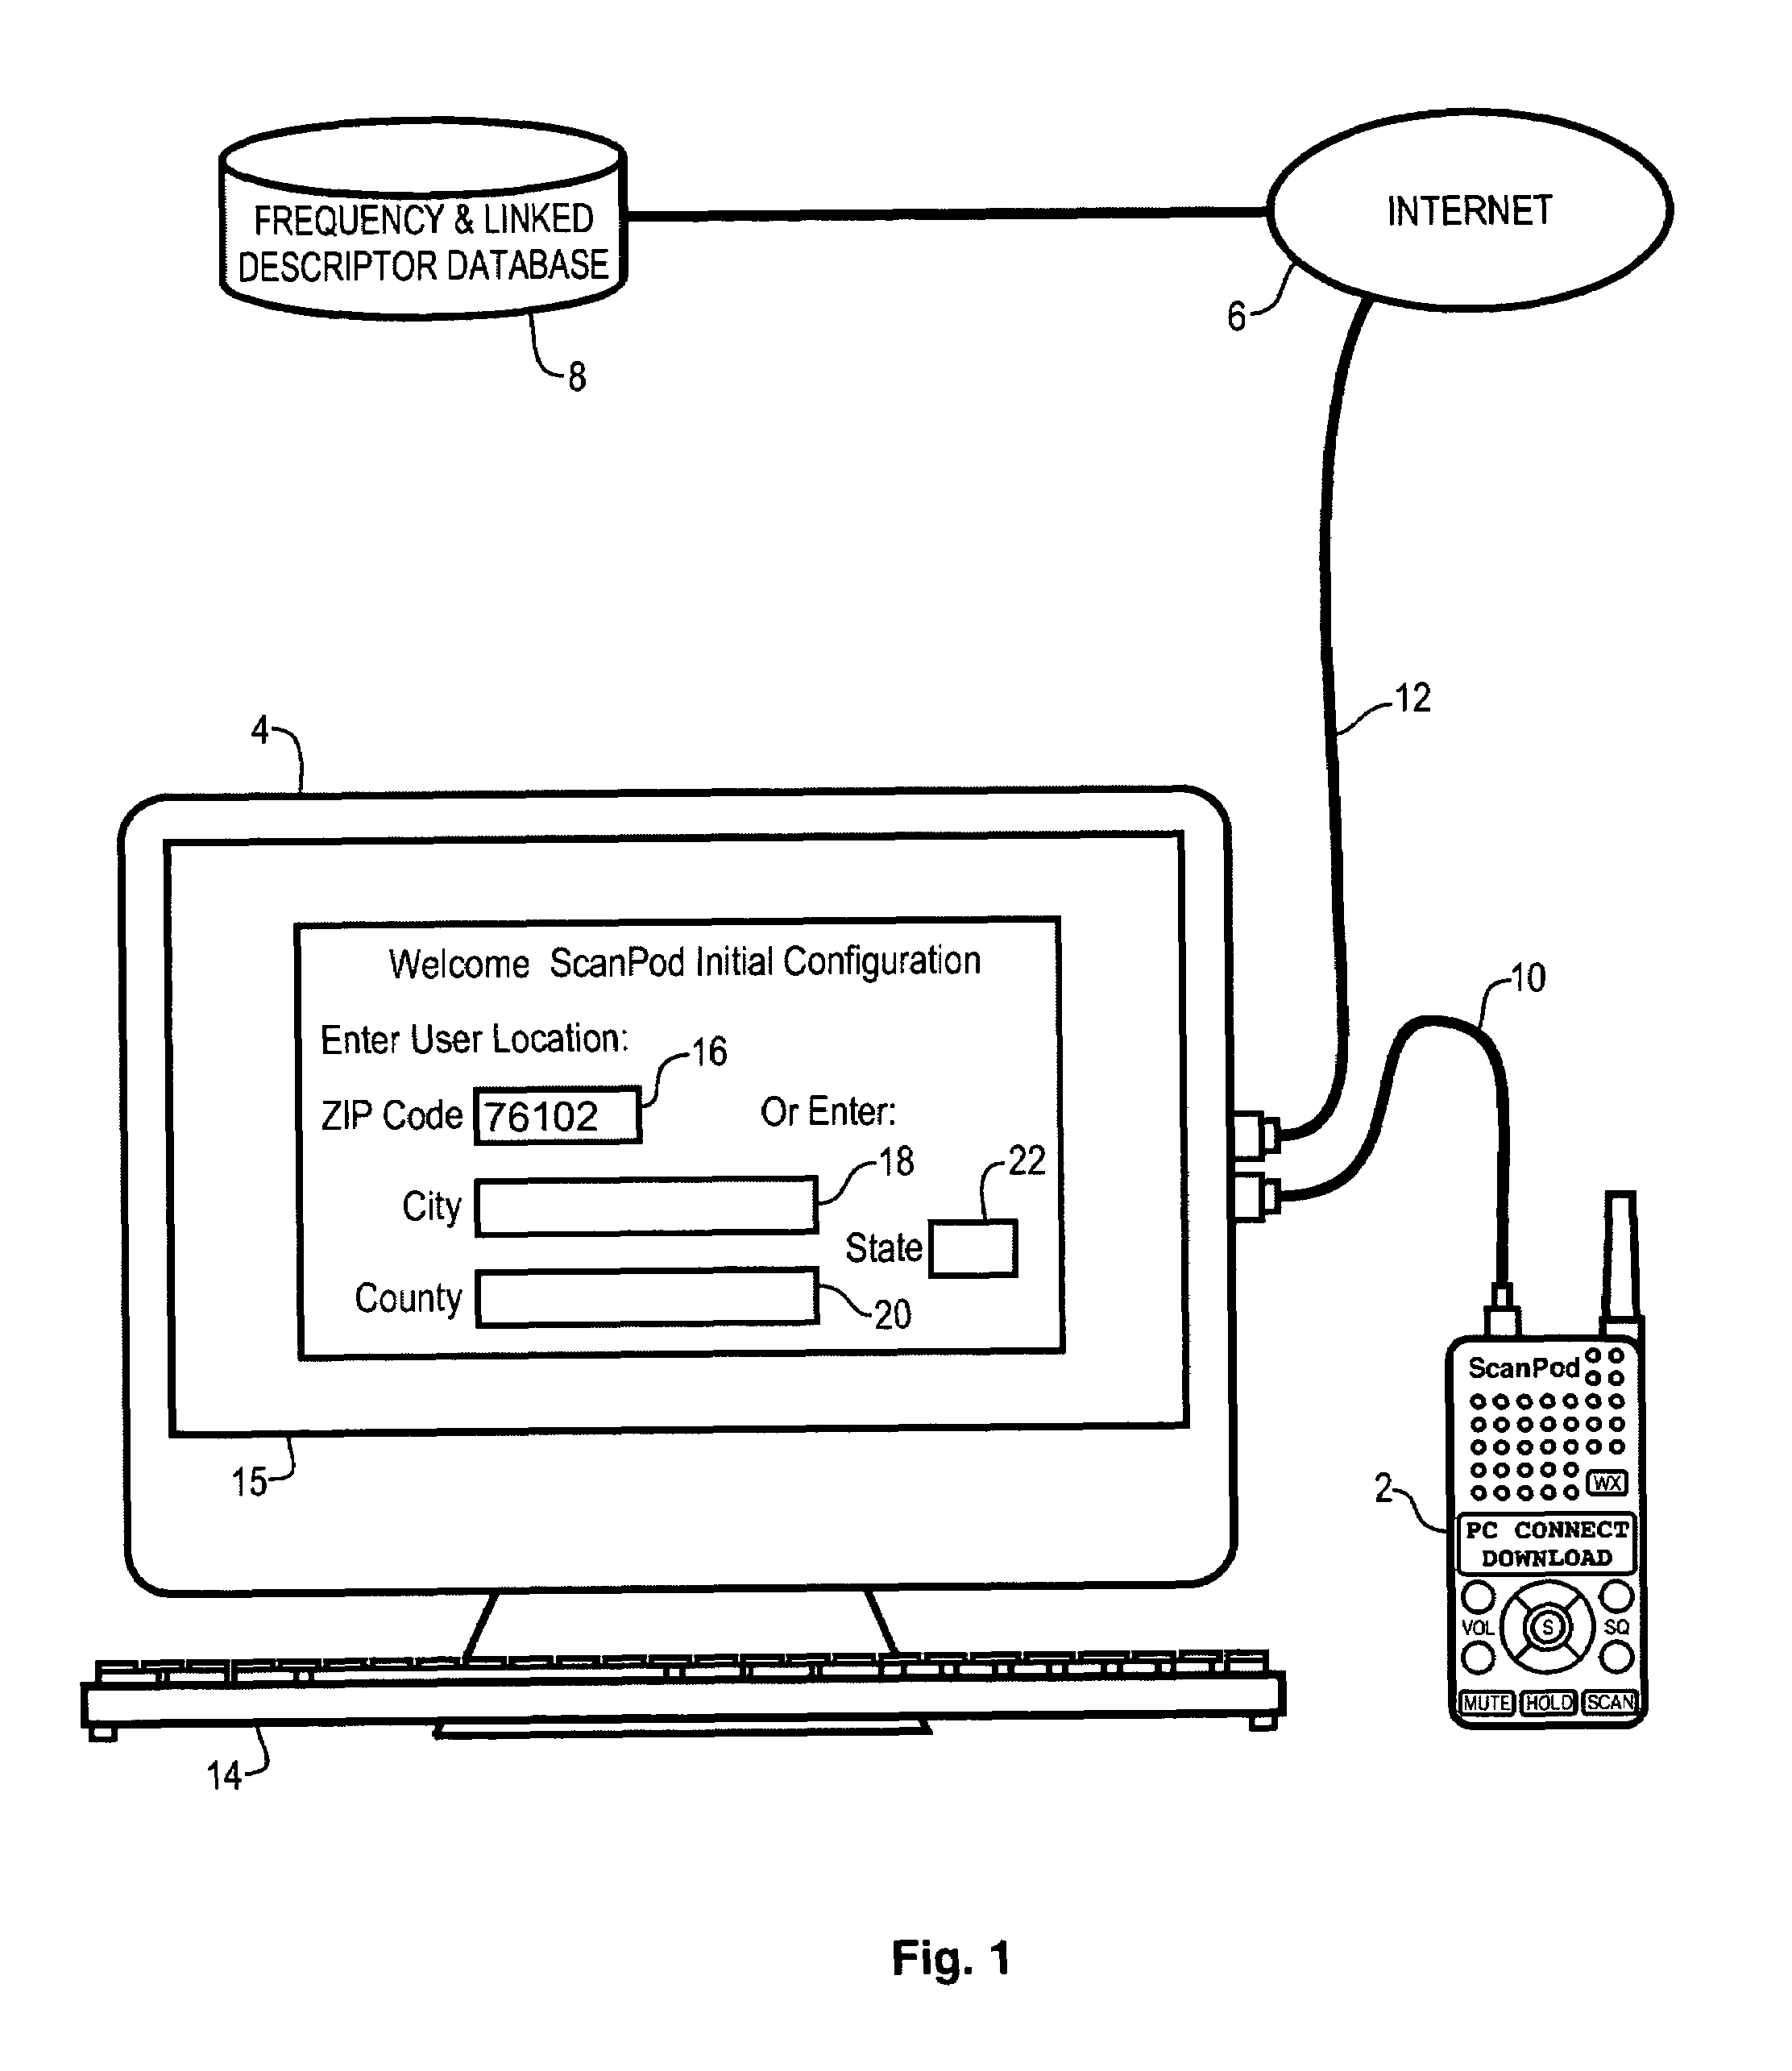 Radio scanner programmed from frequency database and method